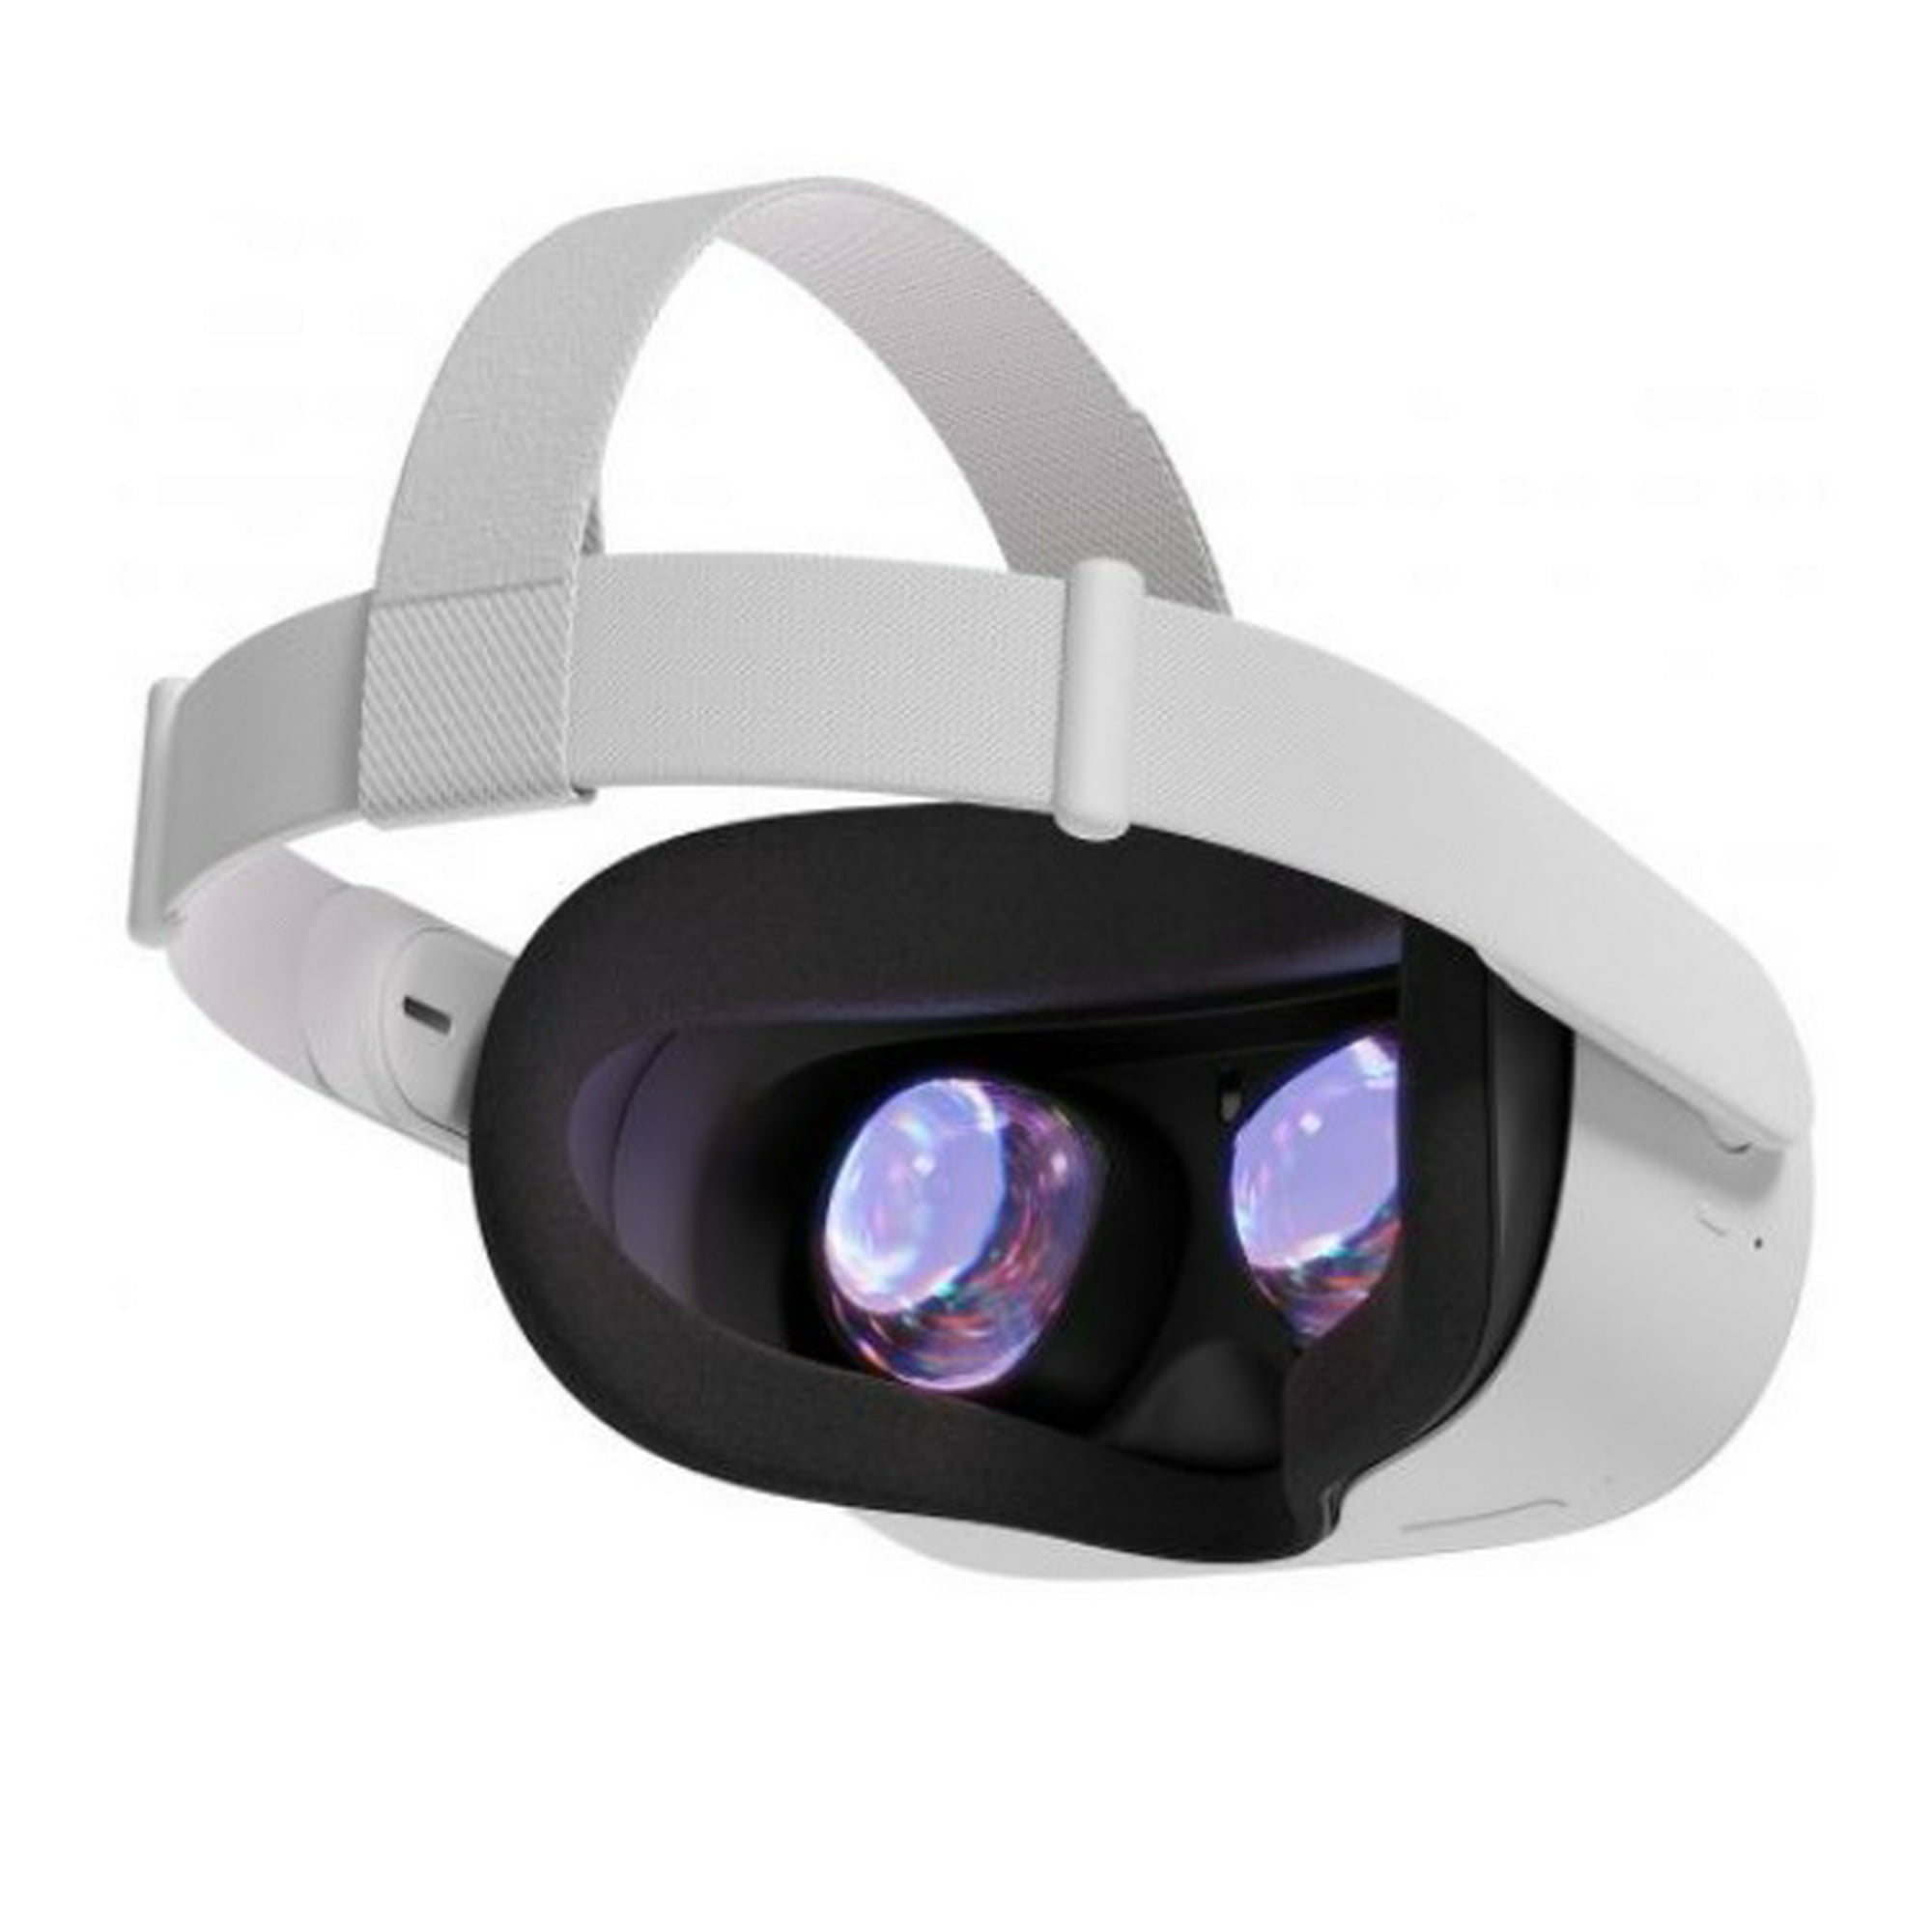 Meta Quest 2- Advanced All-In-One Virtual Reality Headset - 256 GB